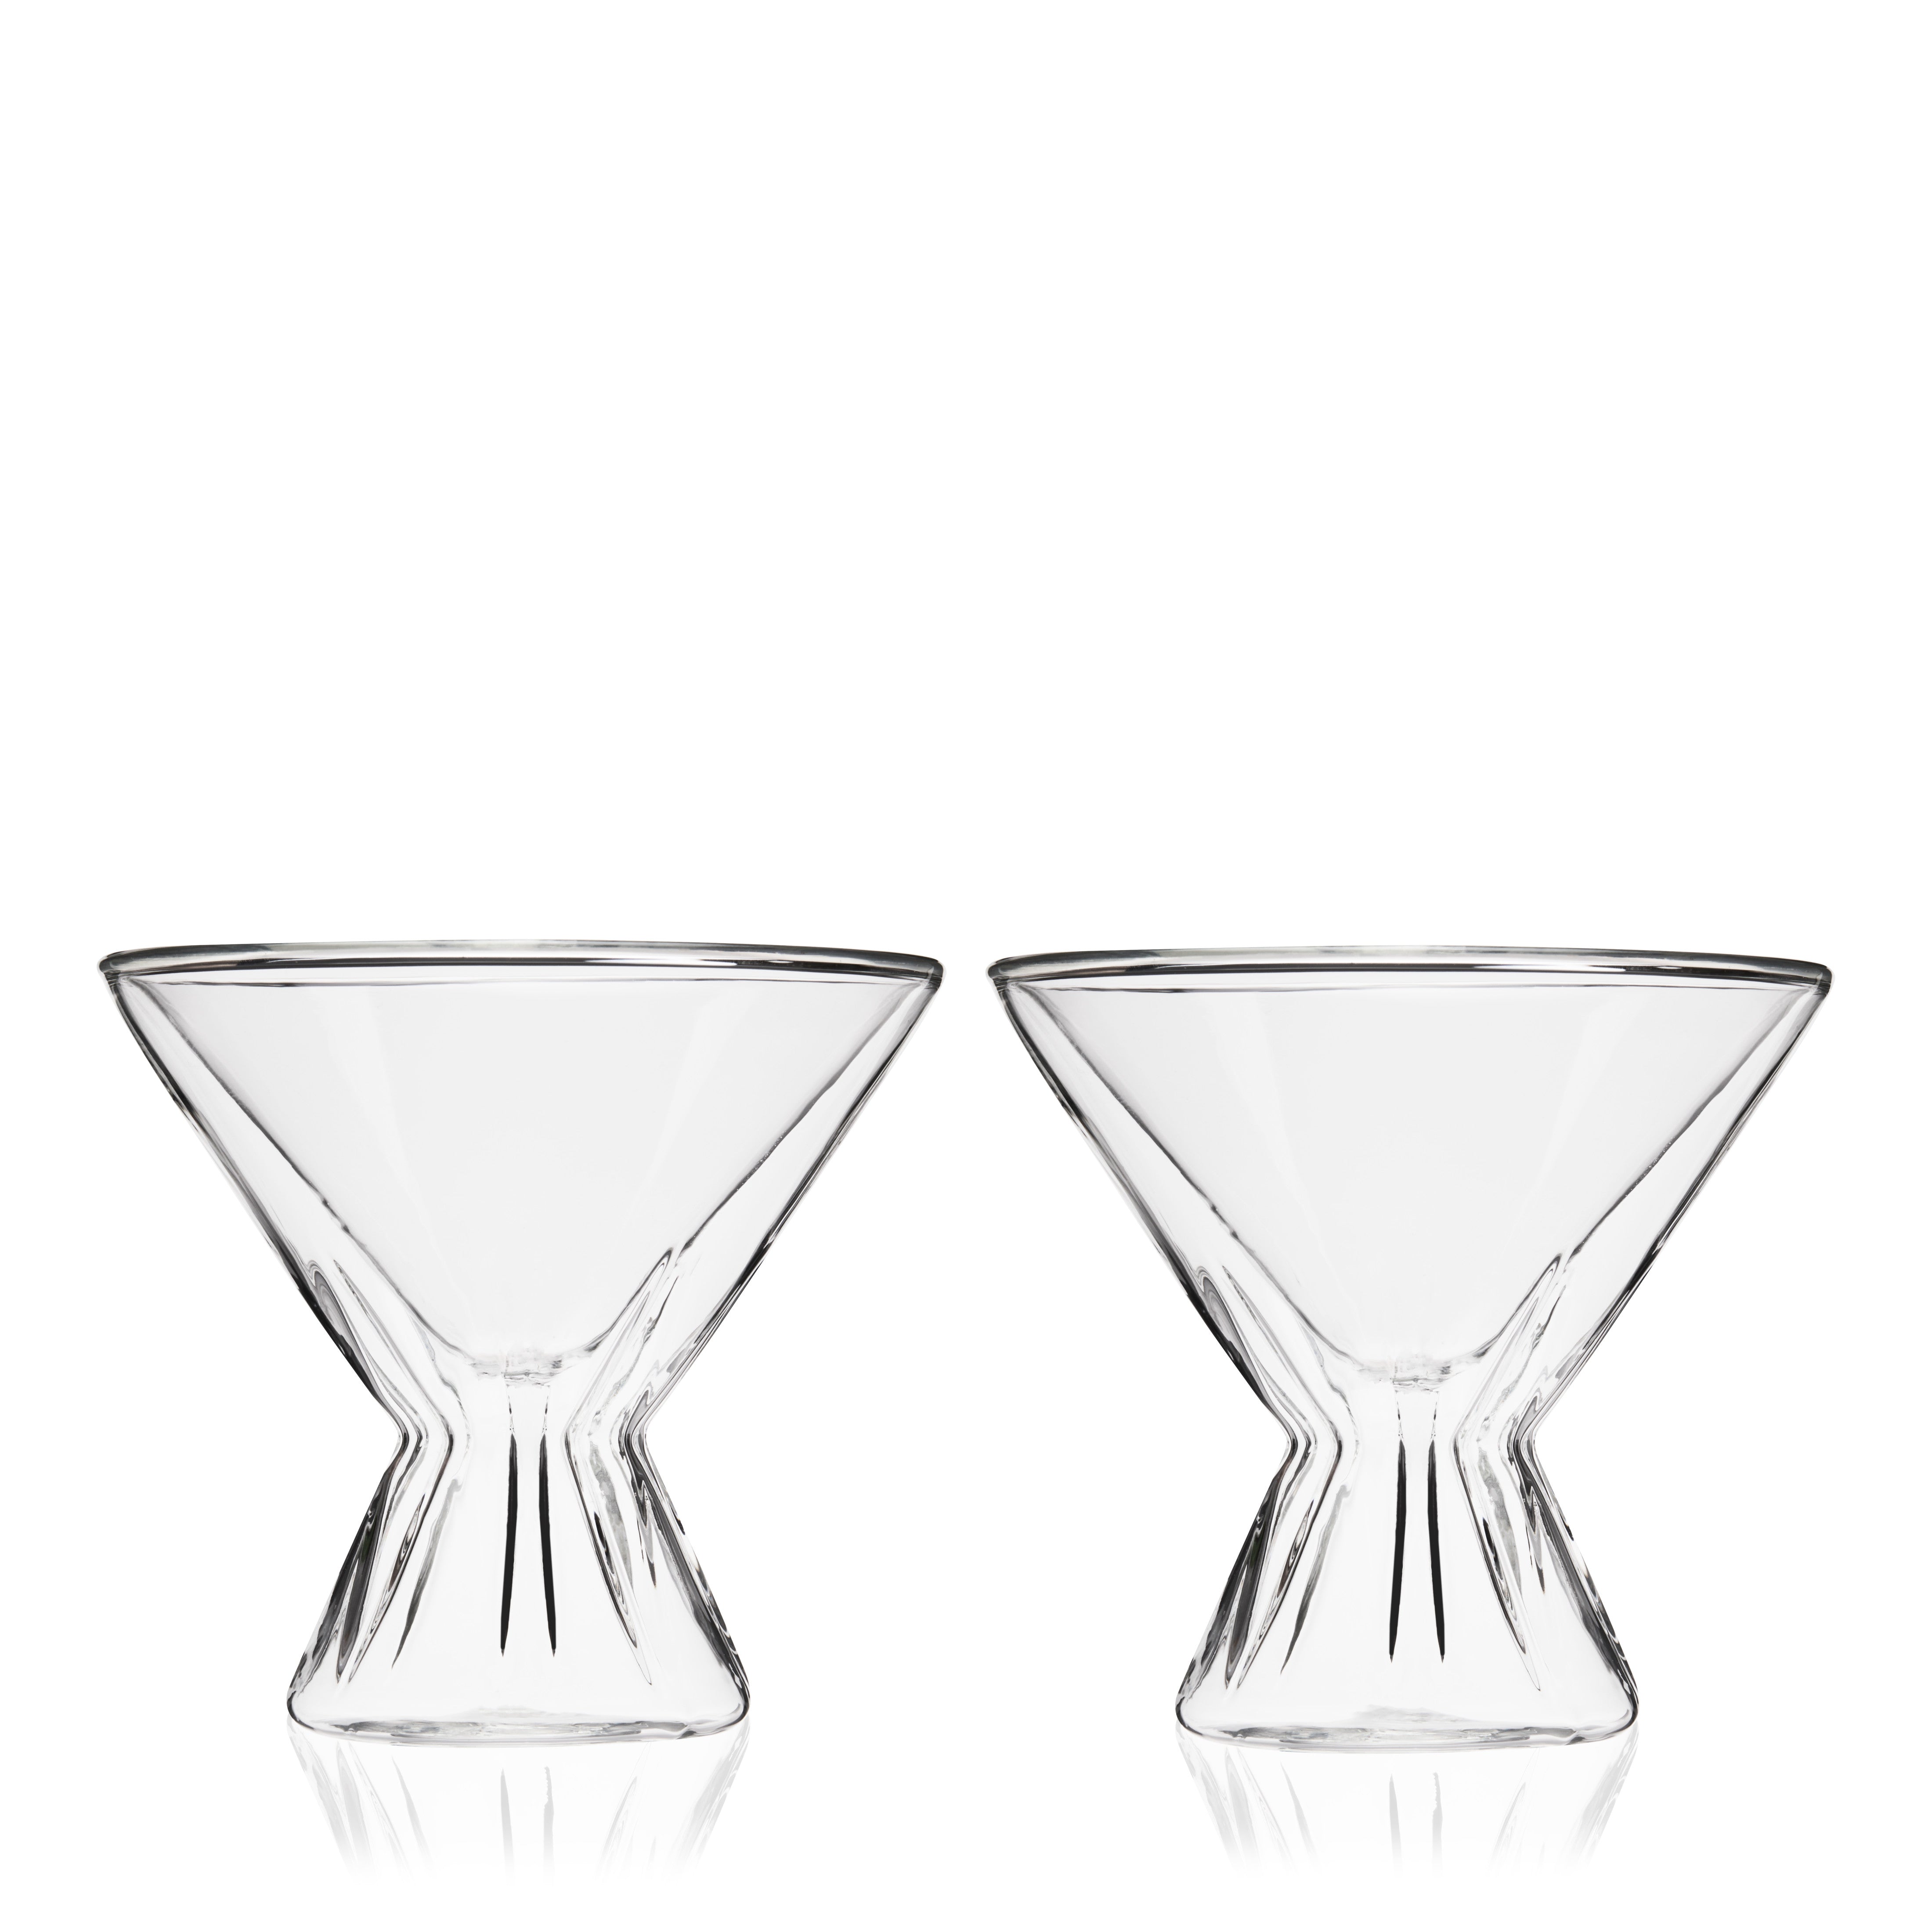 American Metalcraft DWC7 7 oz. Double-Wall Satin Stainless Steel Stemless  Martini Glass